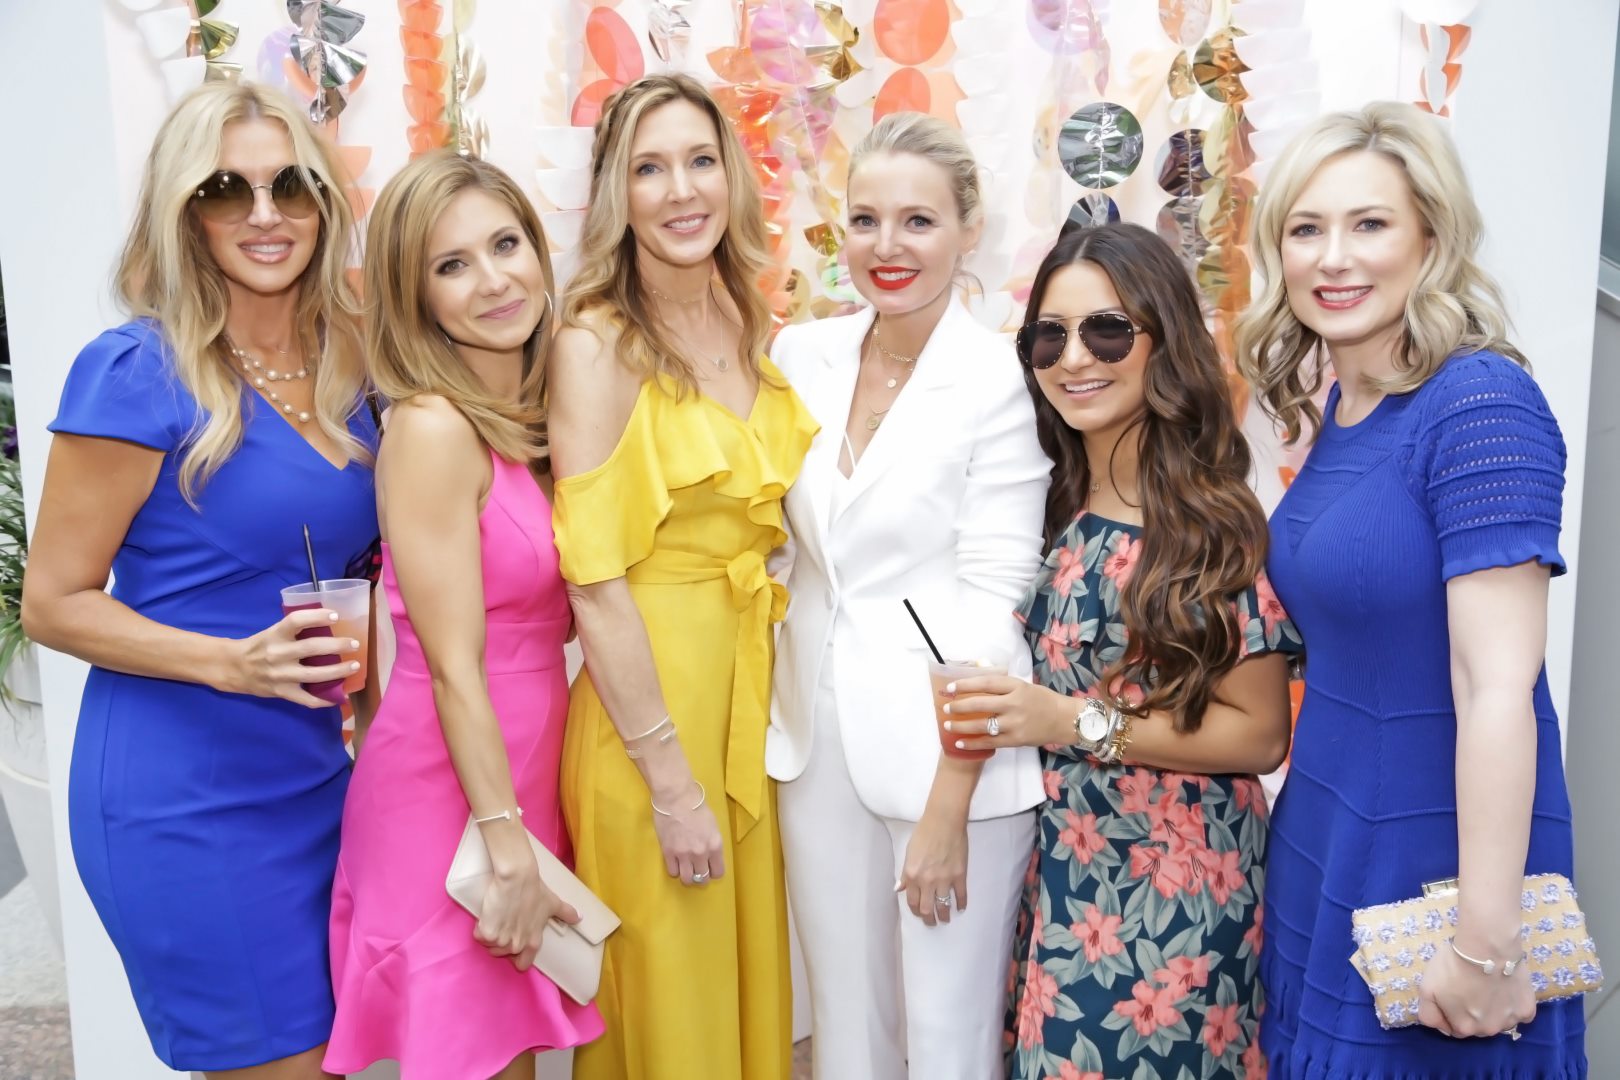 Reward Style Conference 2019, Fashion blogger erin busbee of busbeestyle.com standing with the US YouTube bloggers at a cocktail party in Dallas, Texas